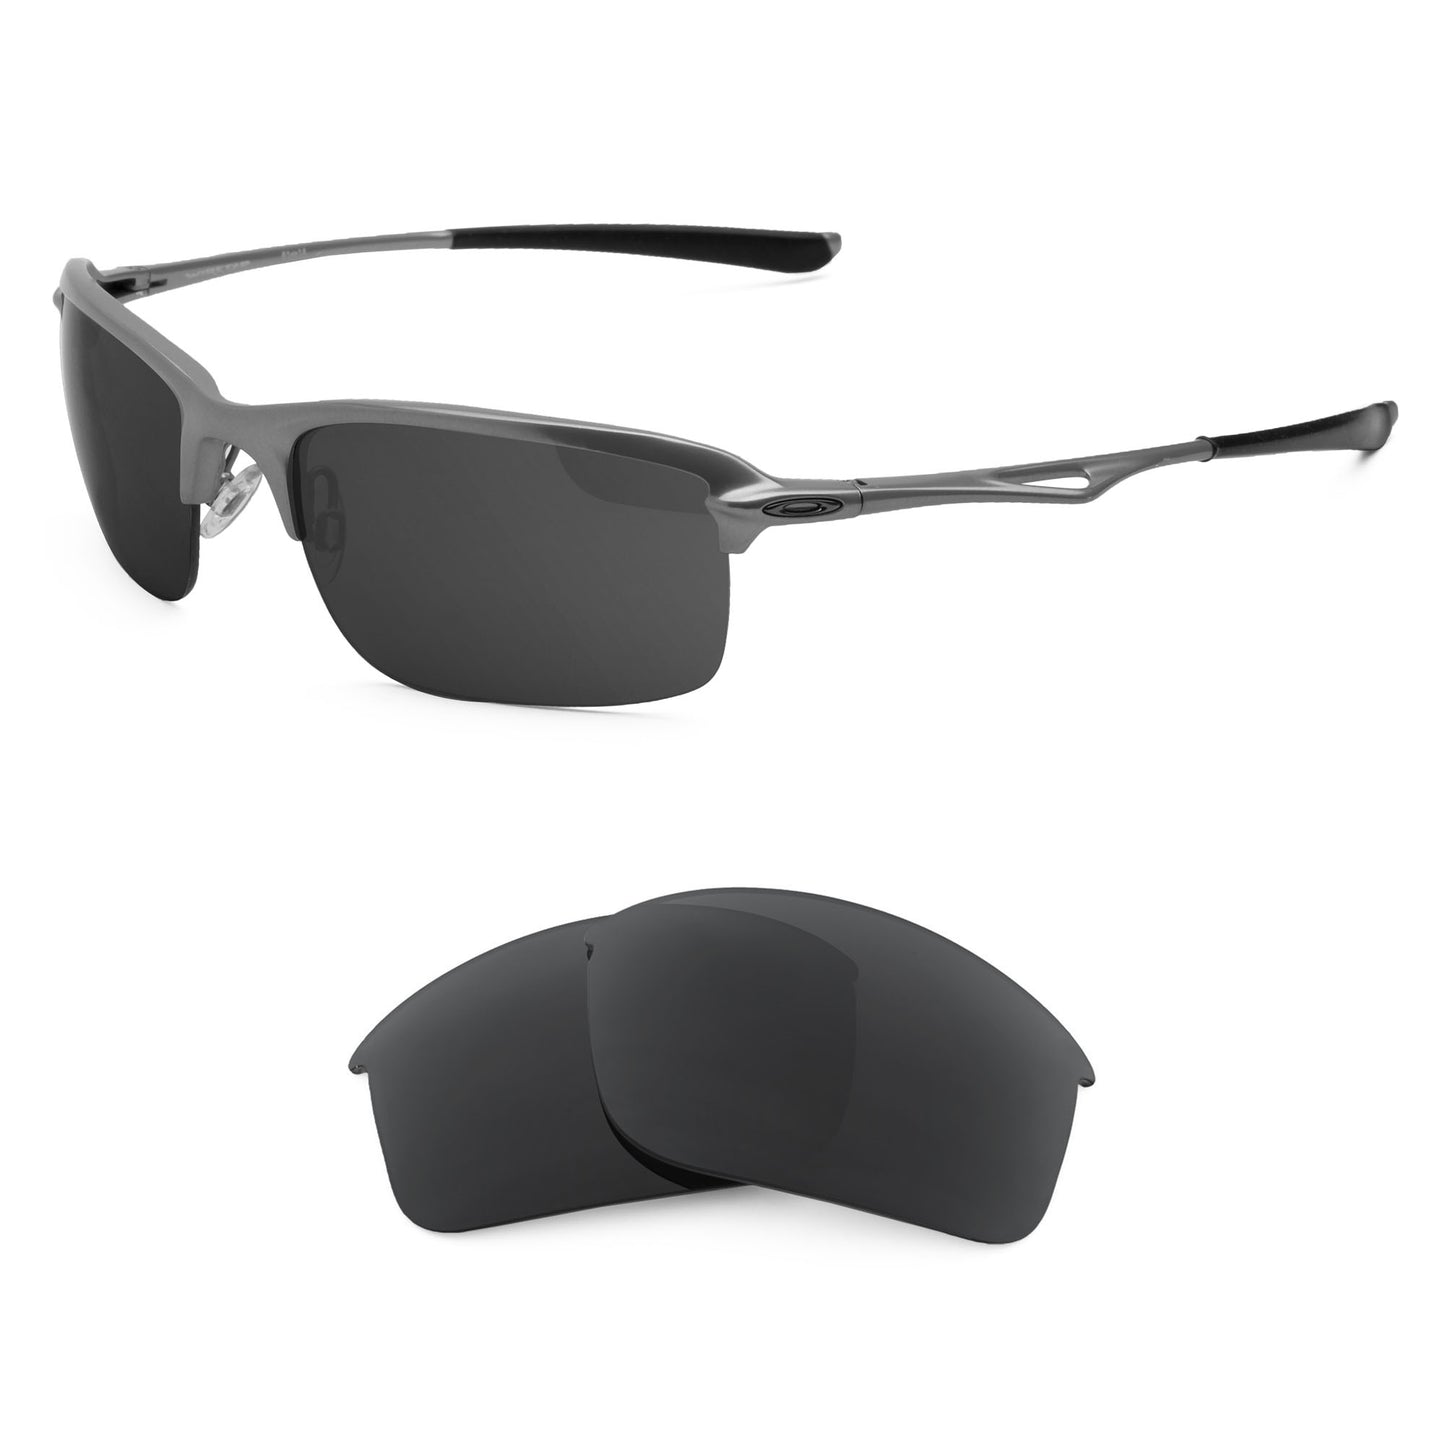 Oakley Wiretap (2013) sunglasses with replacement lenses